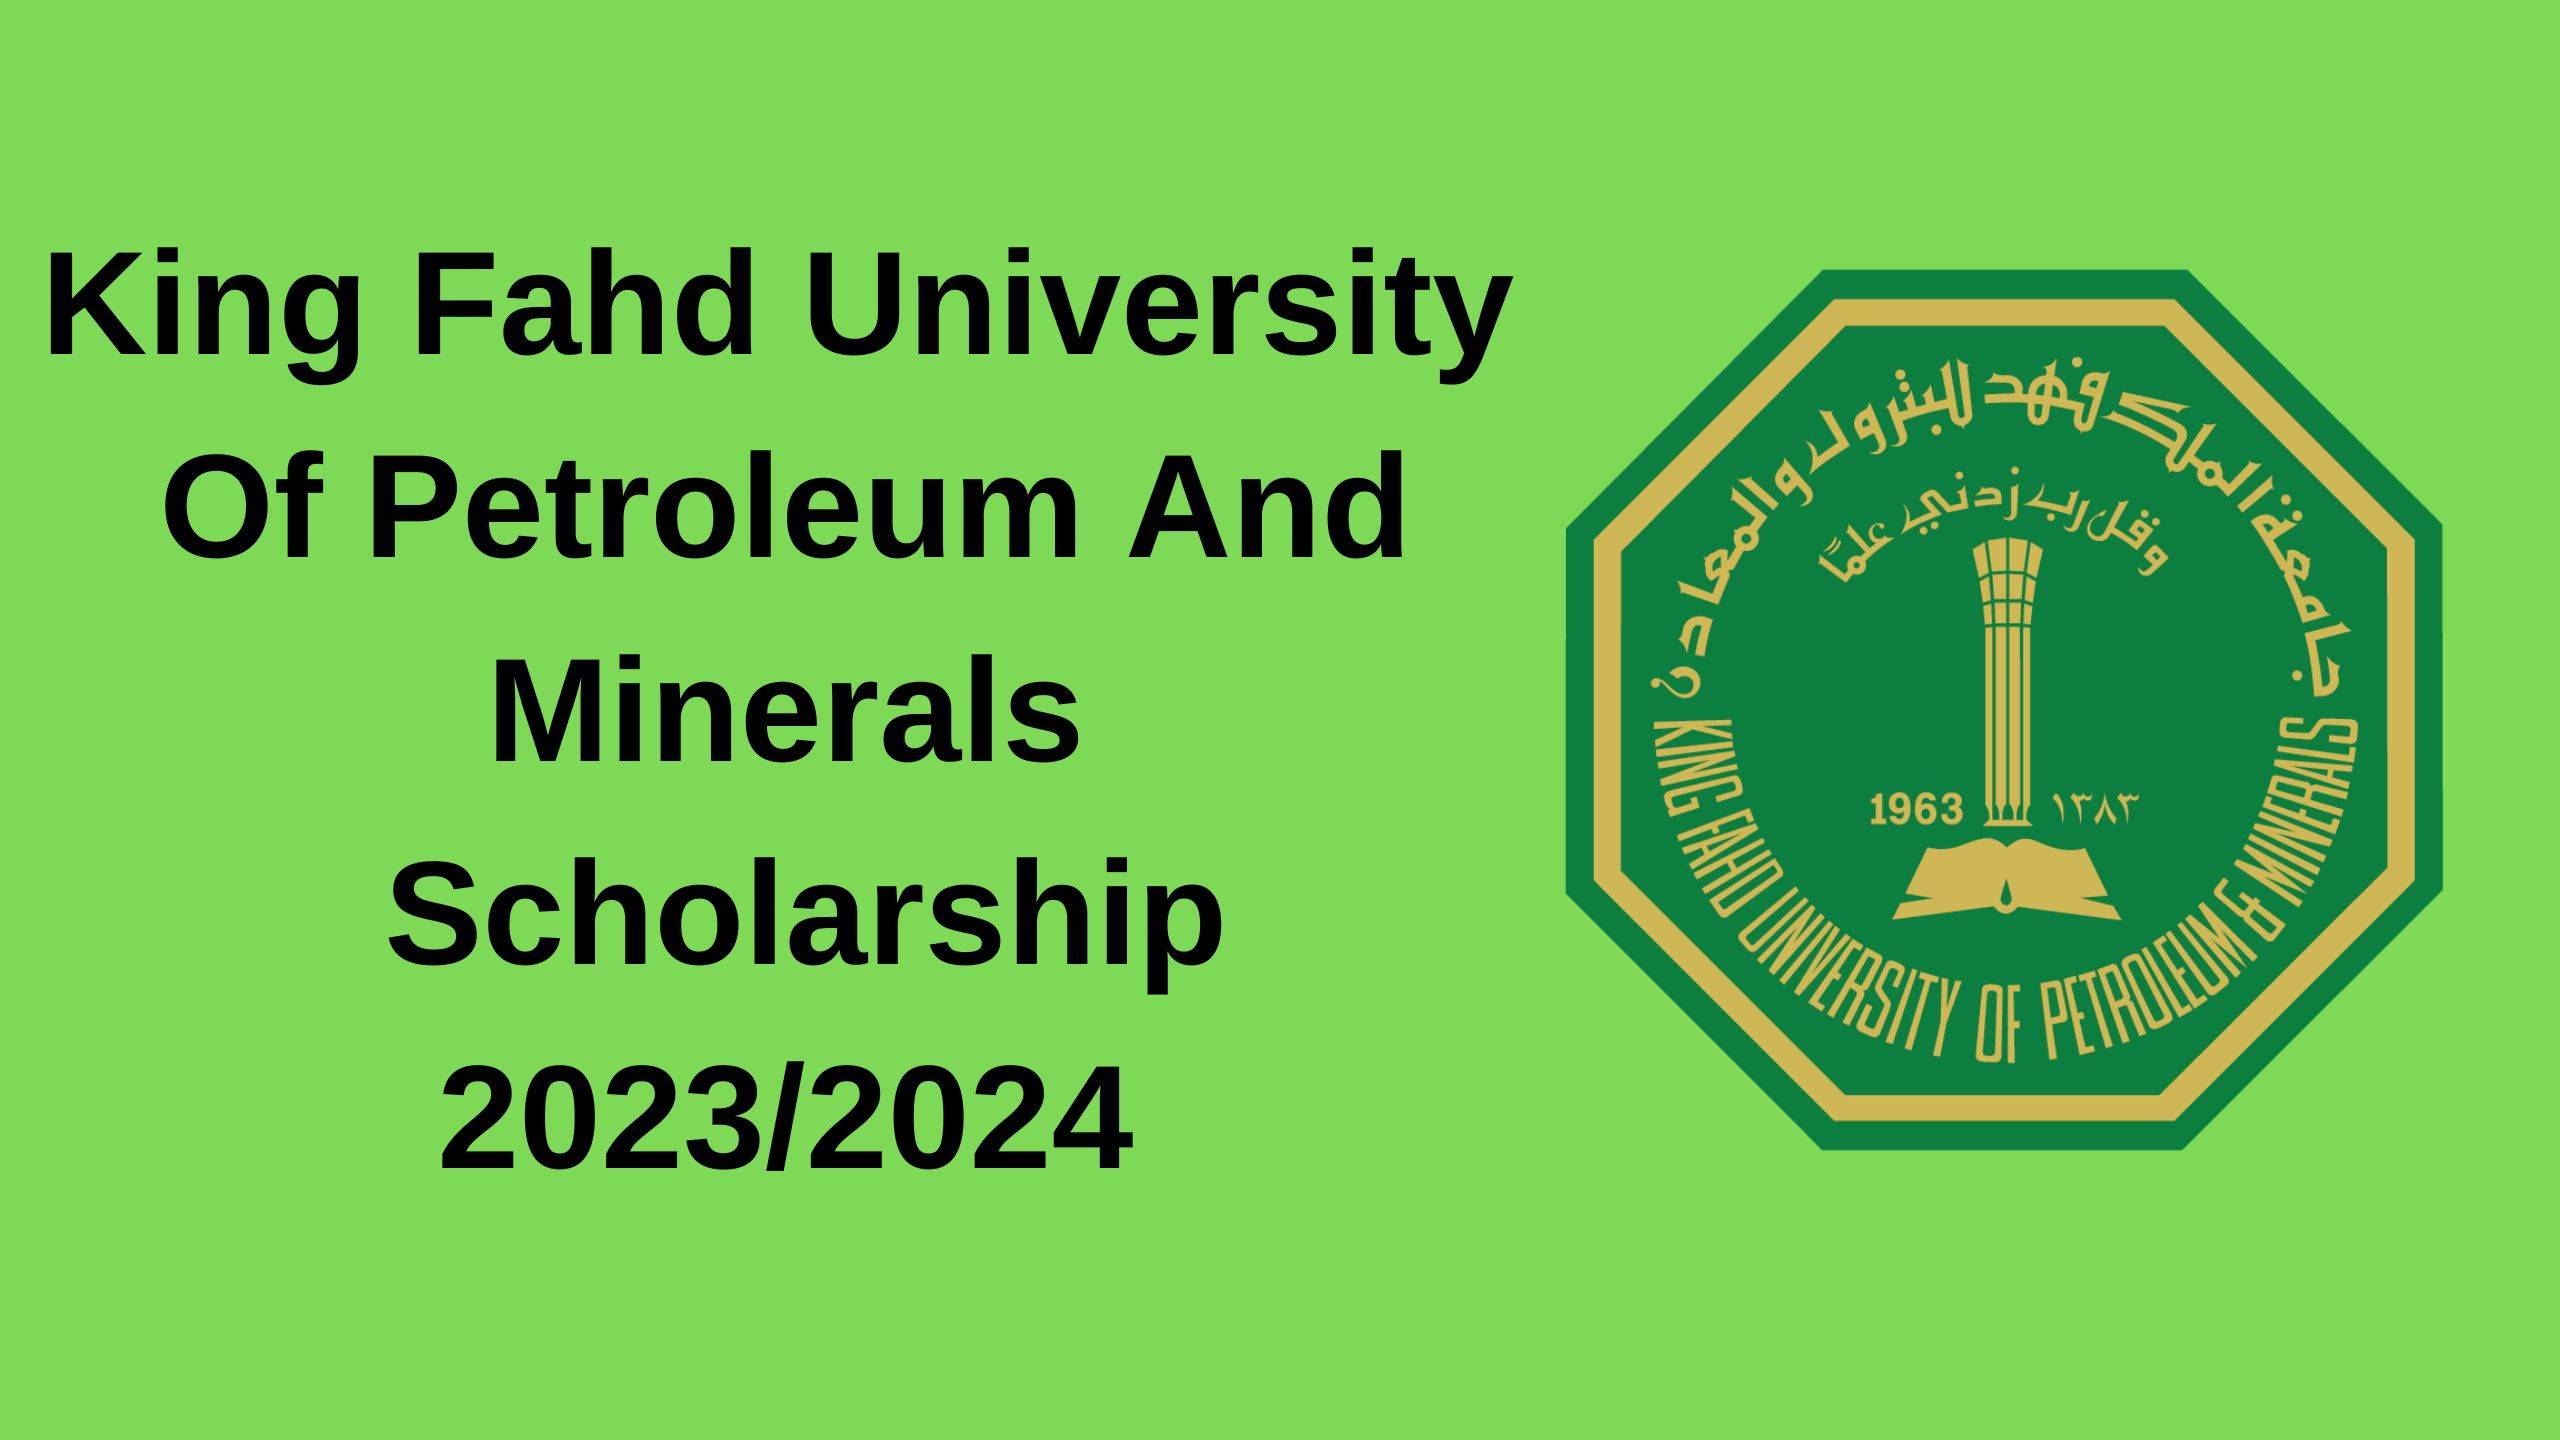 King Fahd University Of Petroleum And Minerals Scholarship 2023/2024